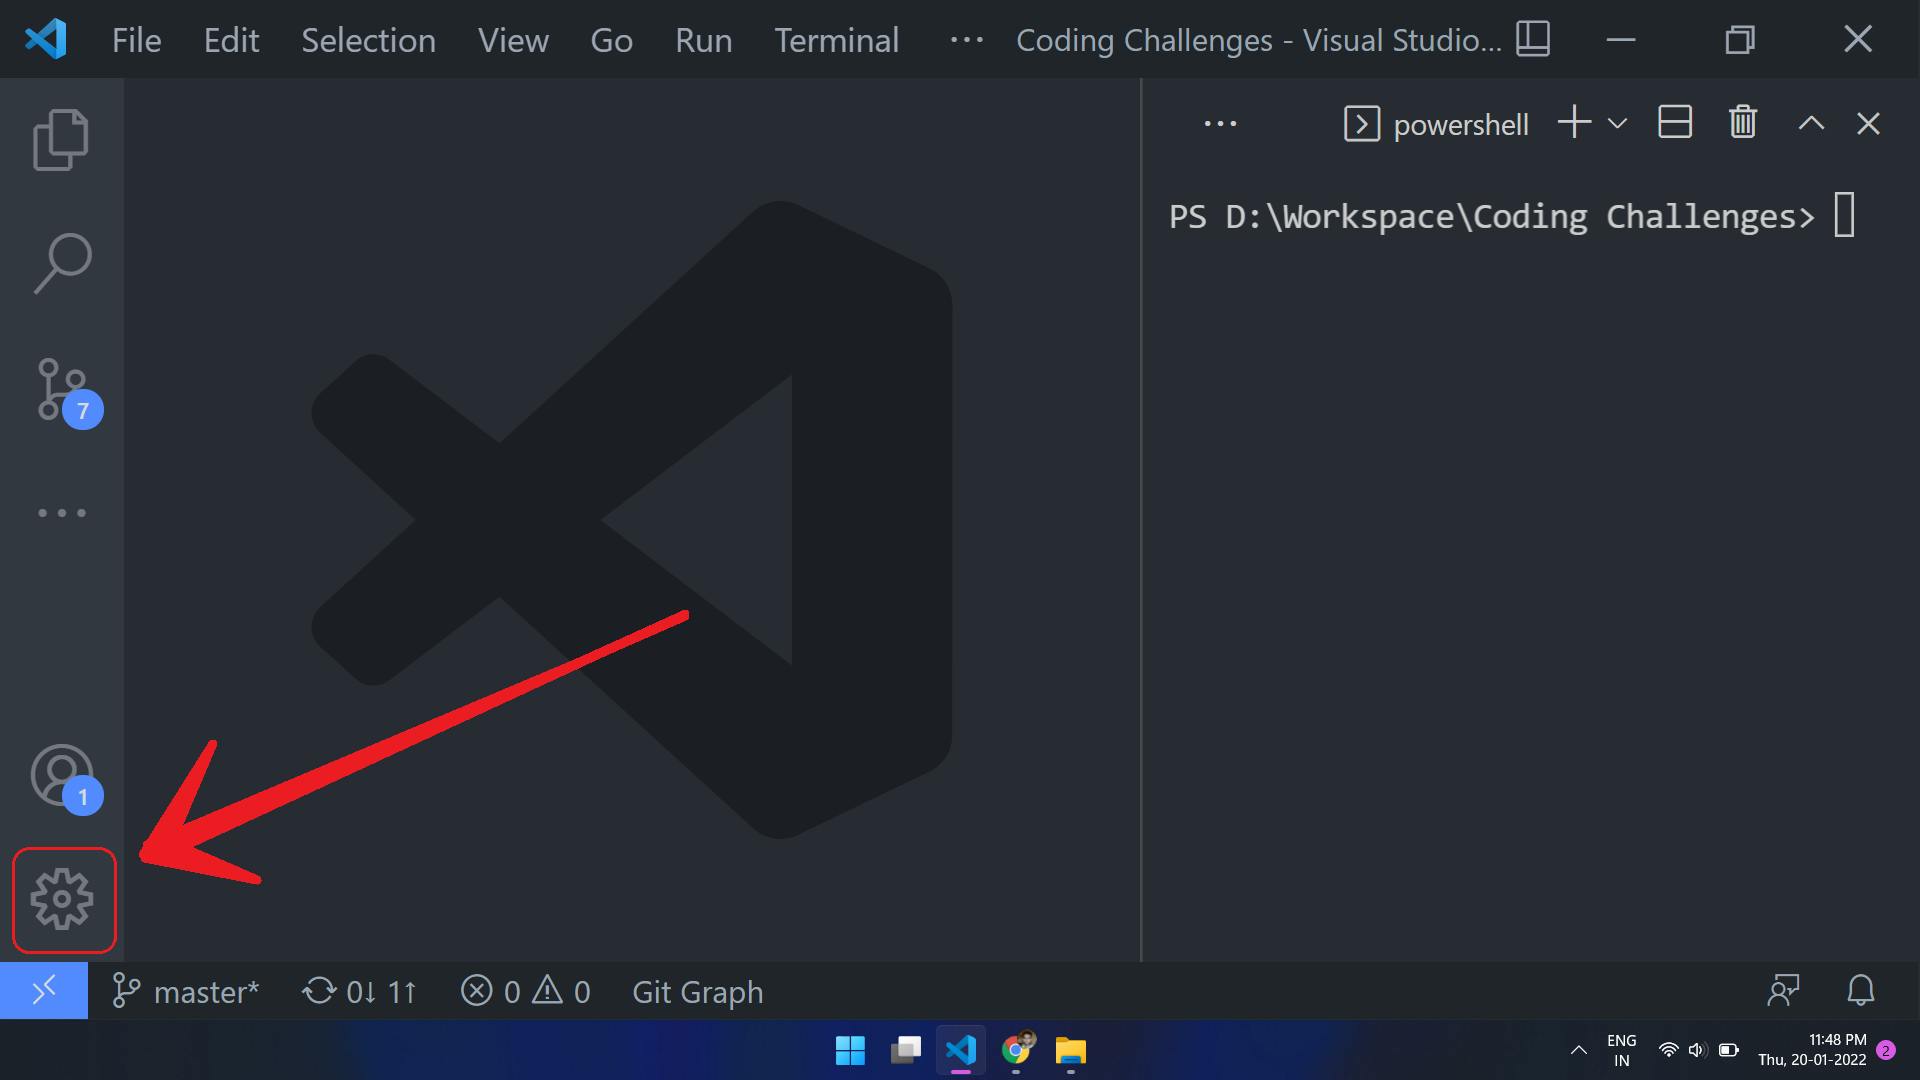 Arrow pointing towards setting icon in vs code